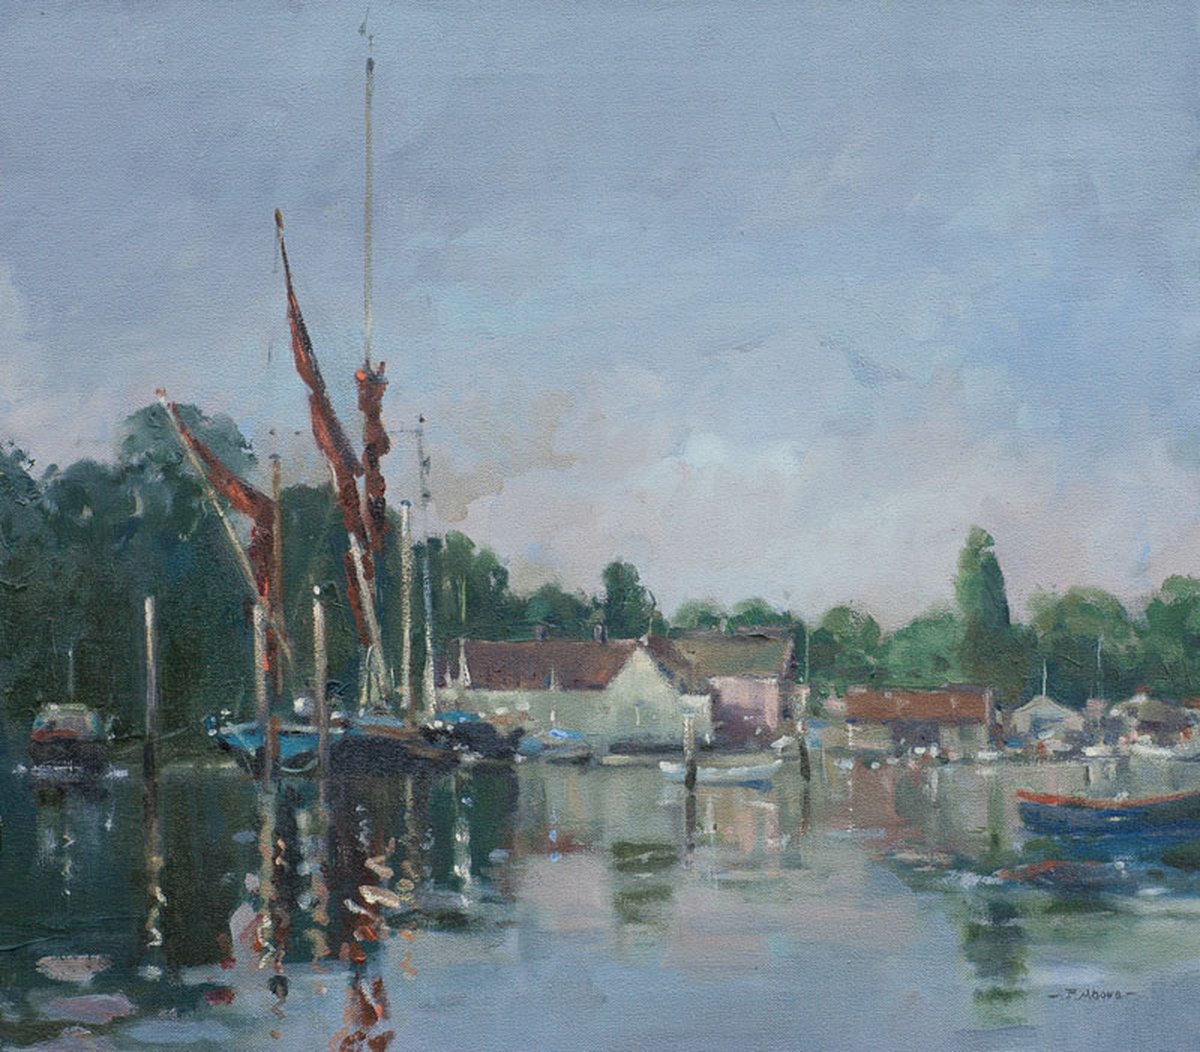 Thames Barges at Pinmill:  Oil on CanvasImage with link to high resolution version